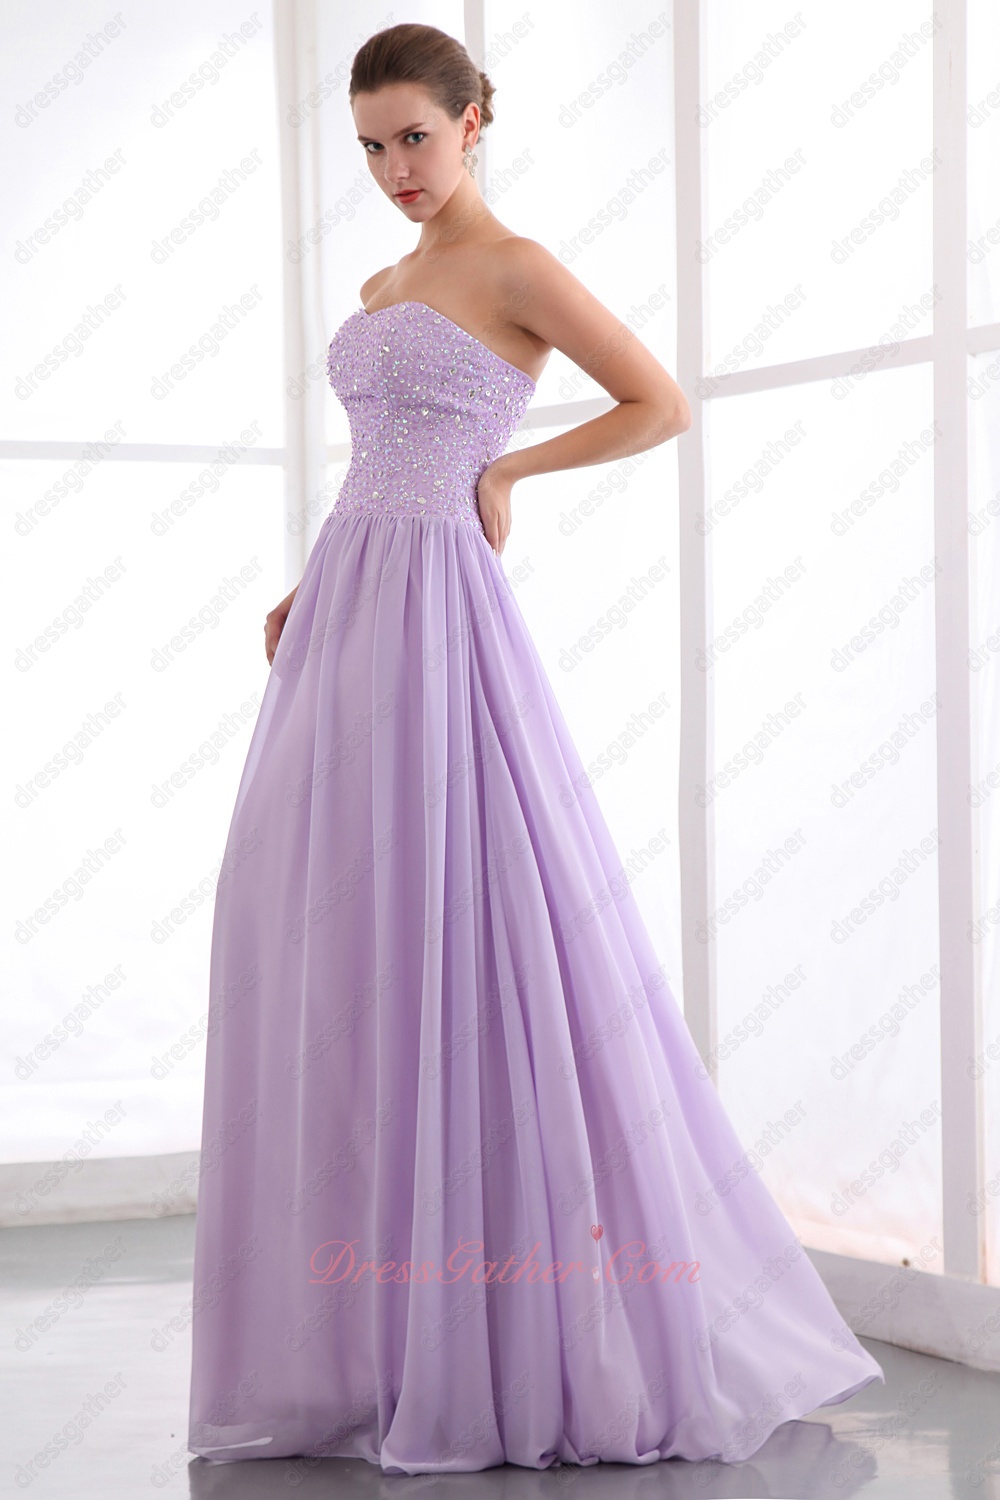 Sweetheart Lilac Formal Party Prom Dress Full Beading Top/Soft Chiffon Bottom - Click Image to Close